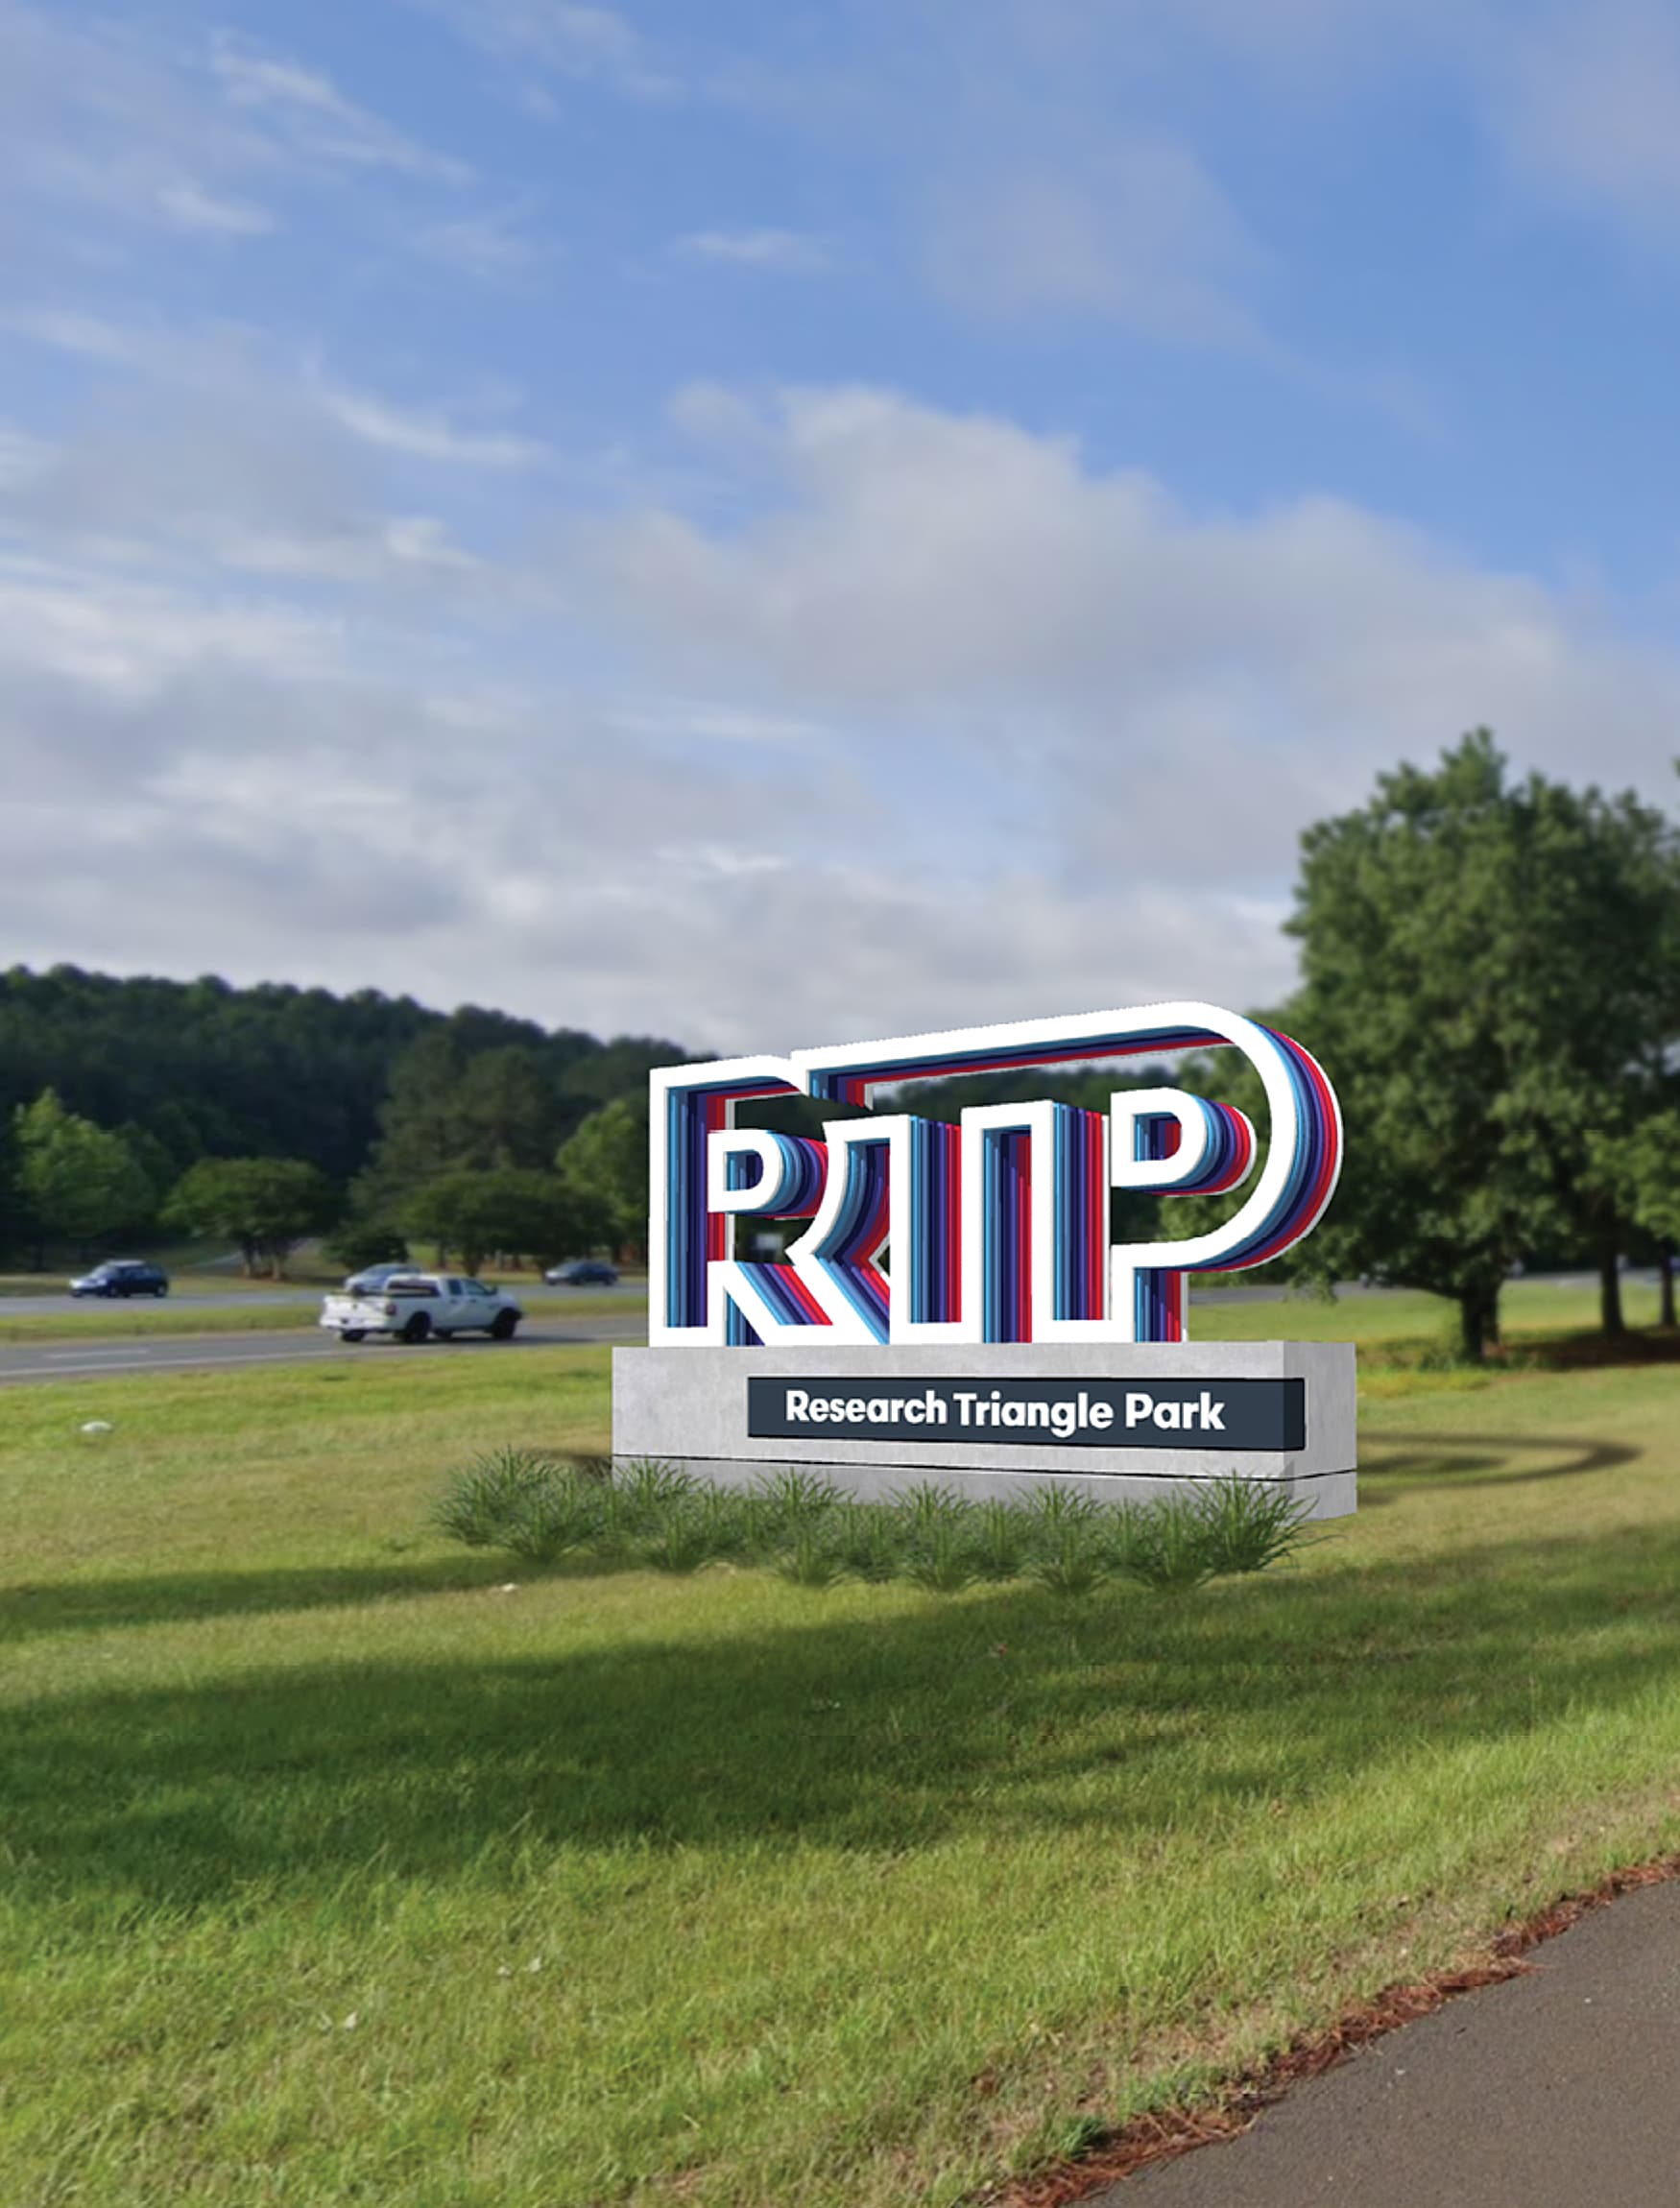 Vehicular monument signage for Research Triangle Park in Raleigh, North Carolina.